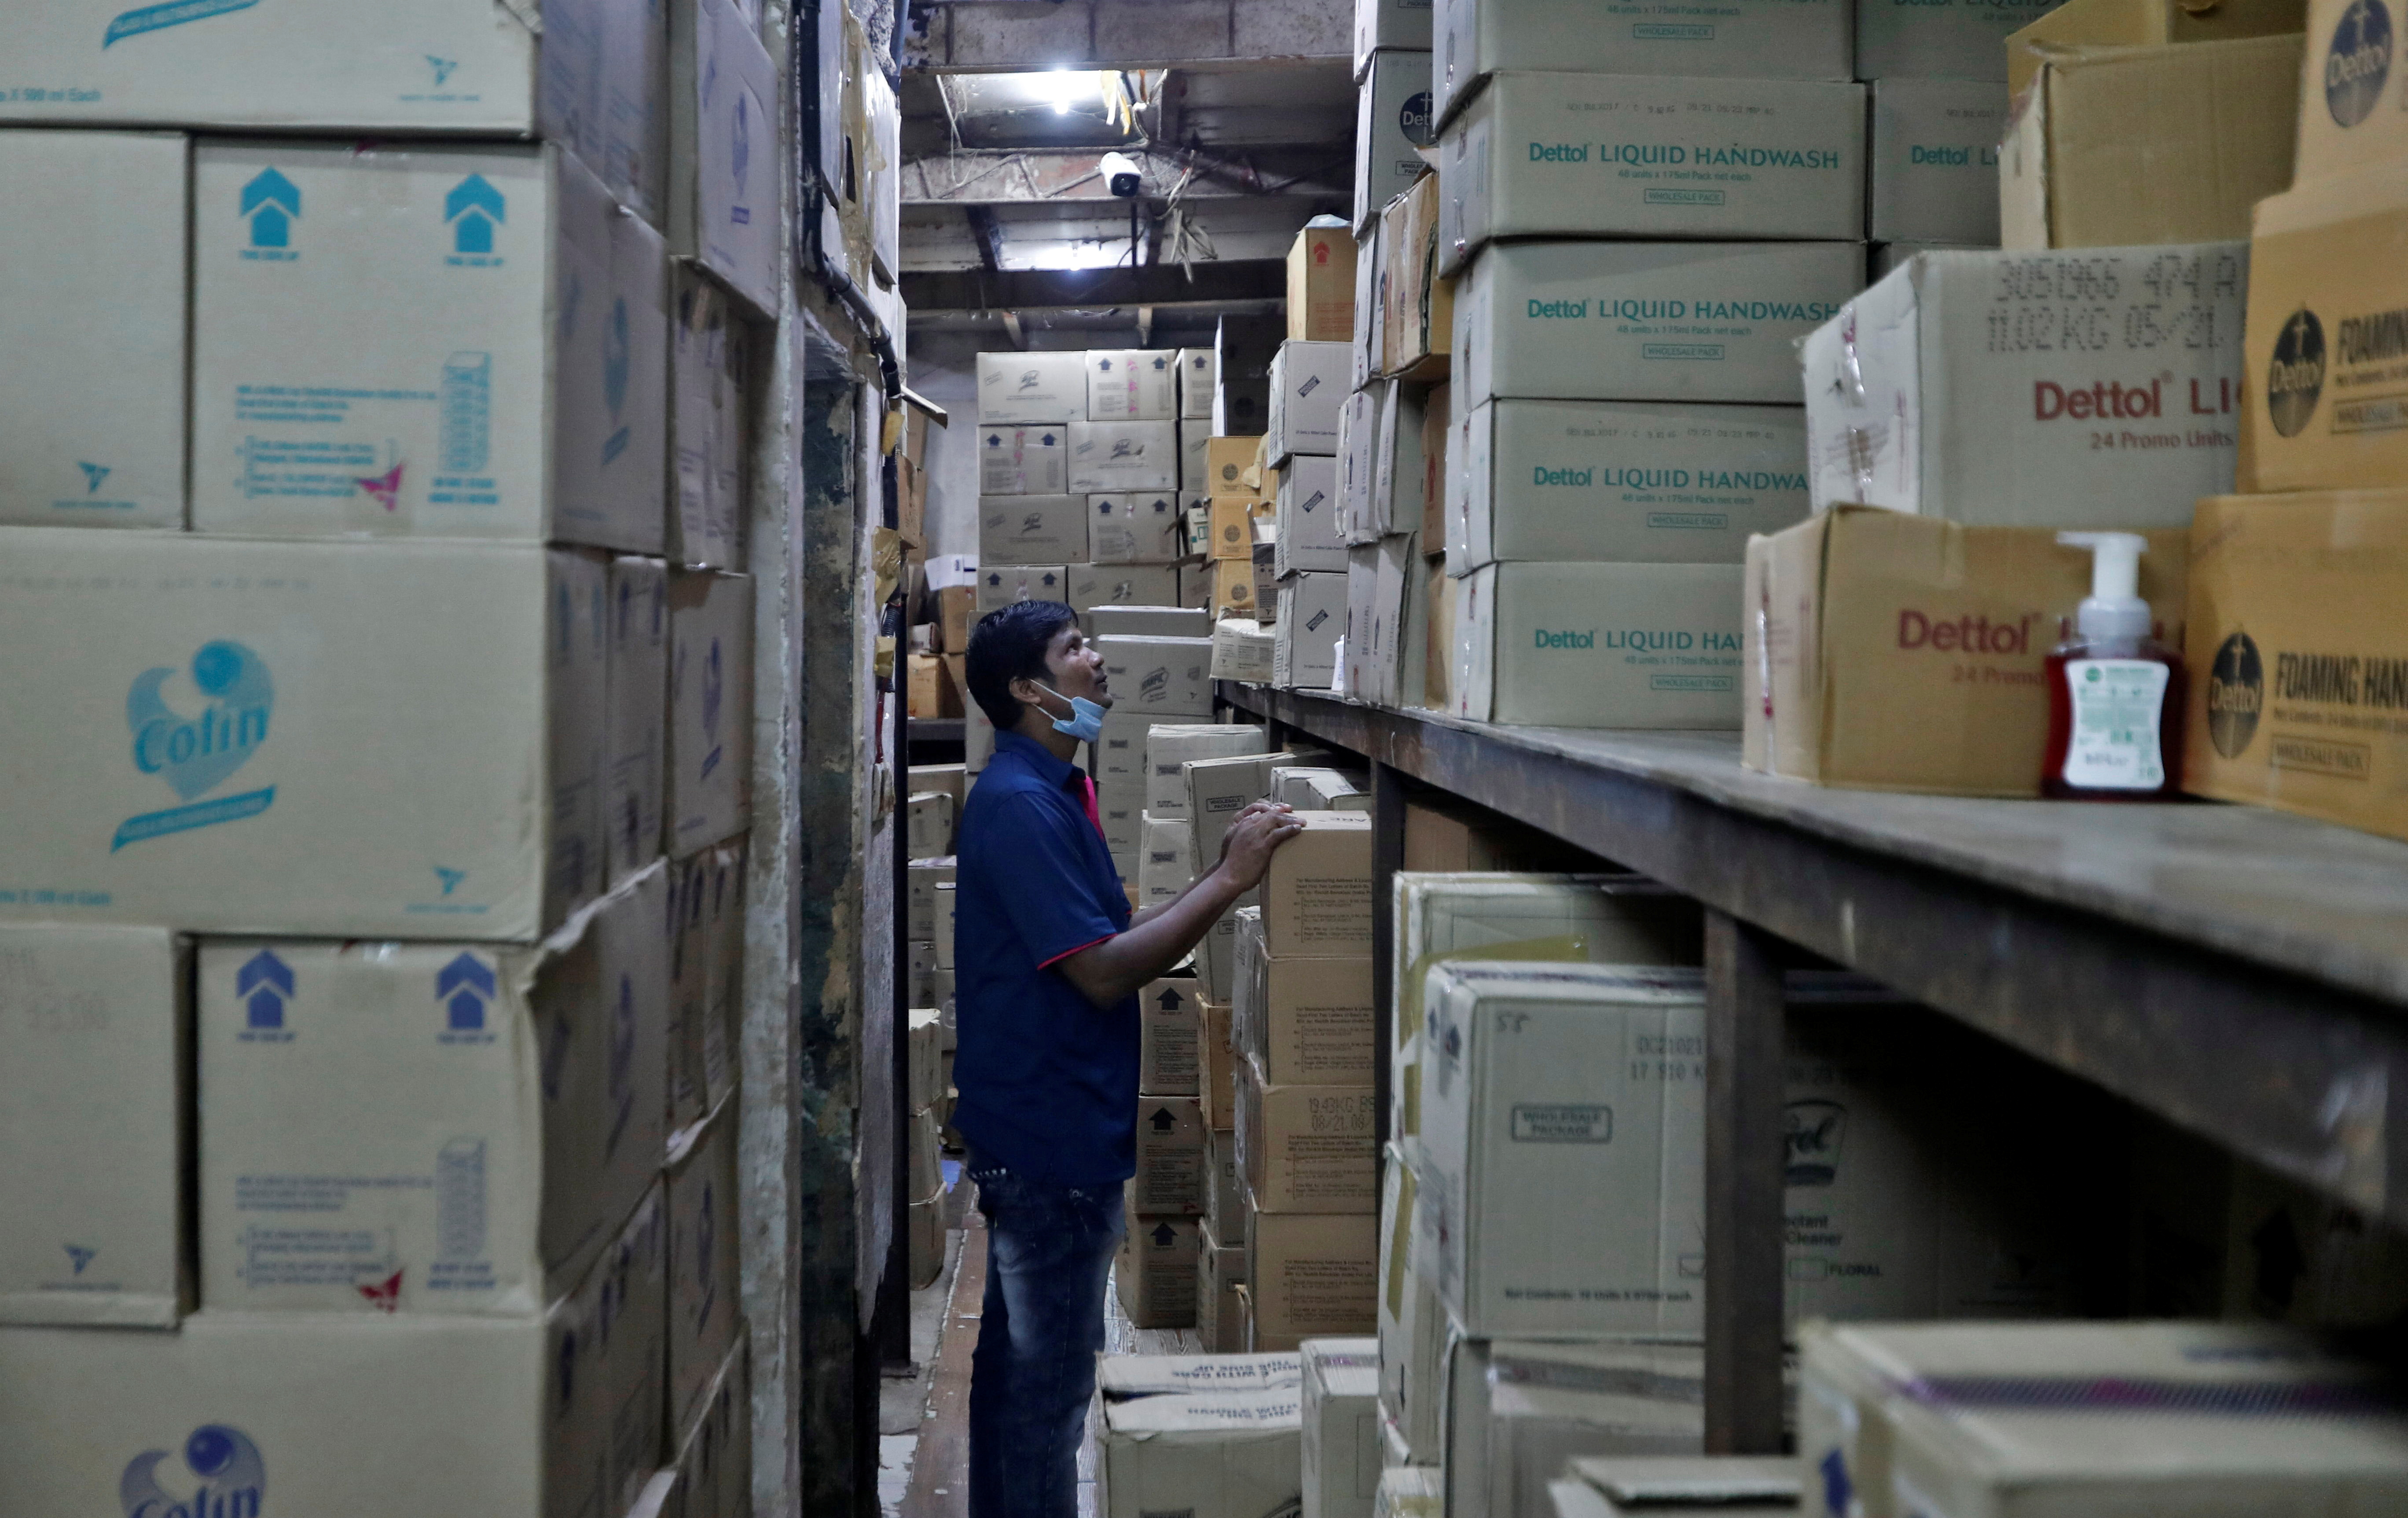 A worker inspects boxes of Reckitt's Dettol handwash at a distributor?s warehouse before loading them onto a truck for delivery to retailers in Mumbai, India, September 17, 2021. Picture taken September 17, 2021 REUTERS/Francis Mascarenhas